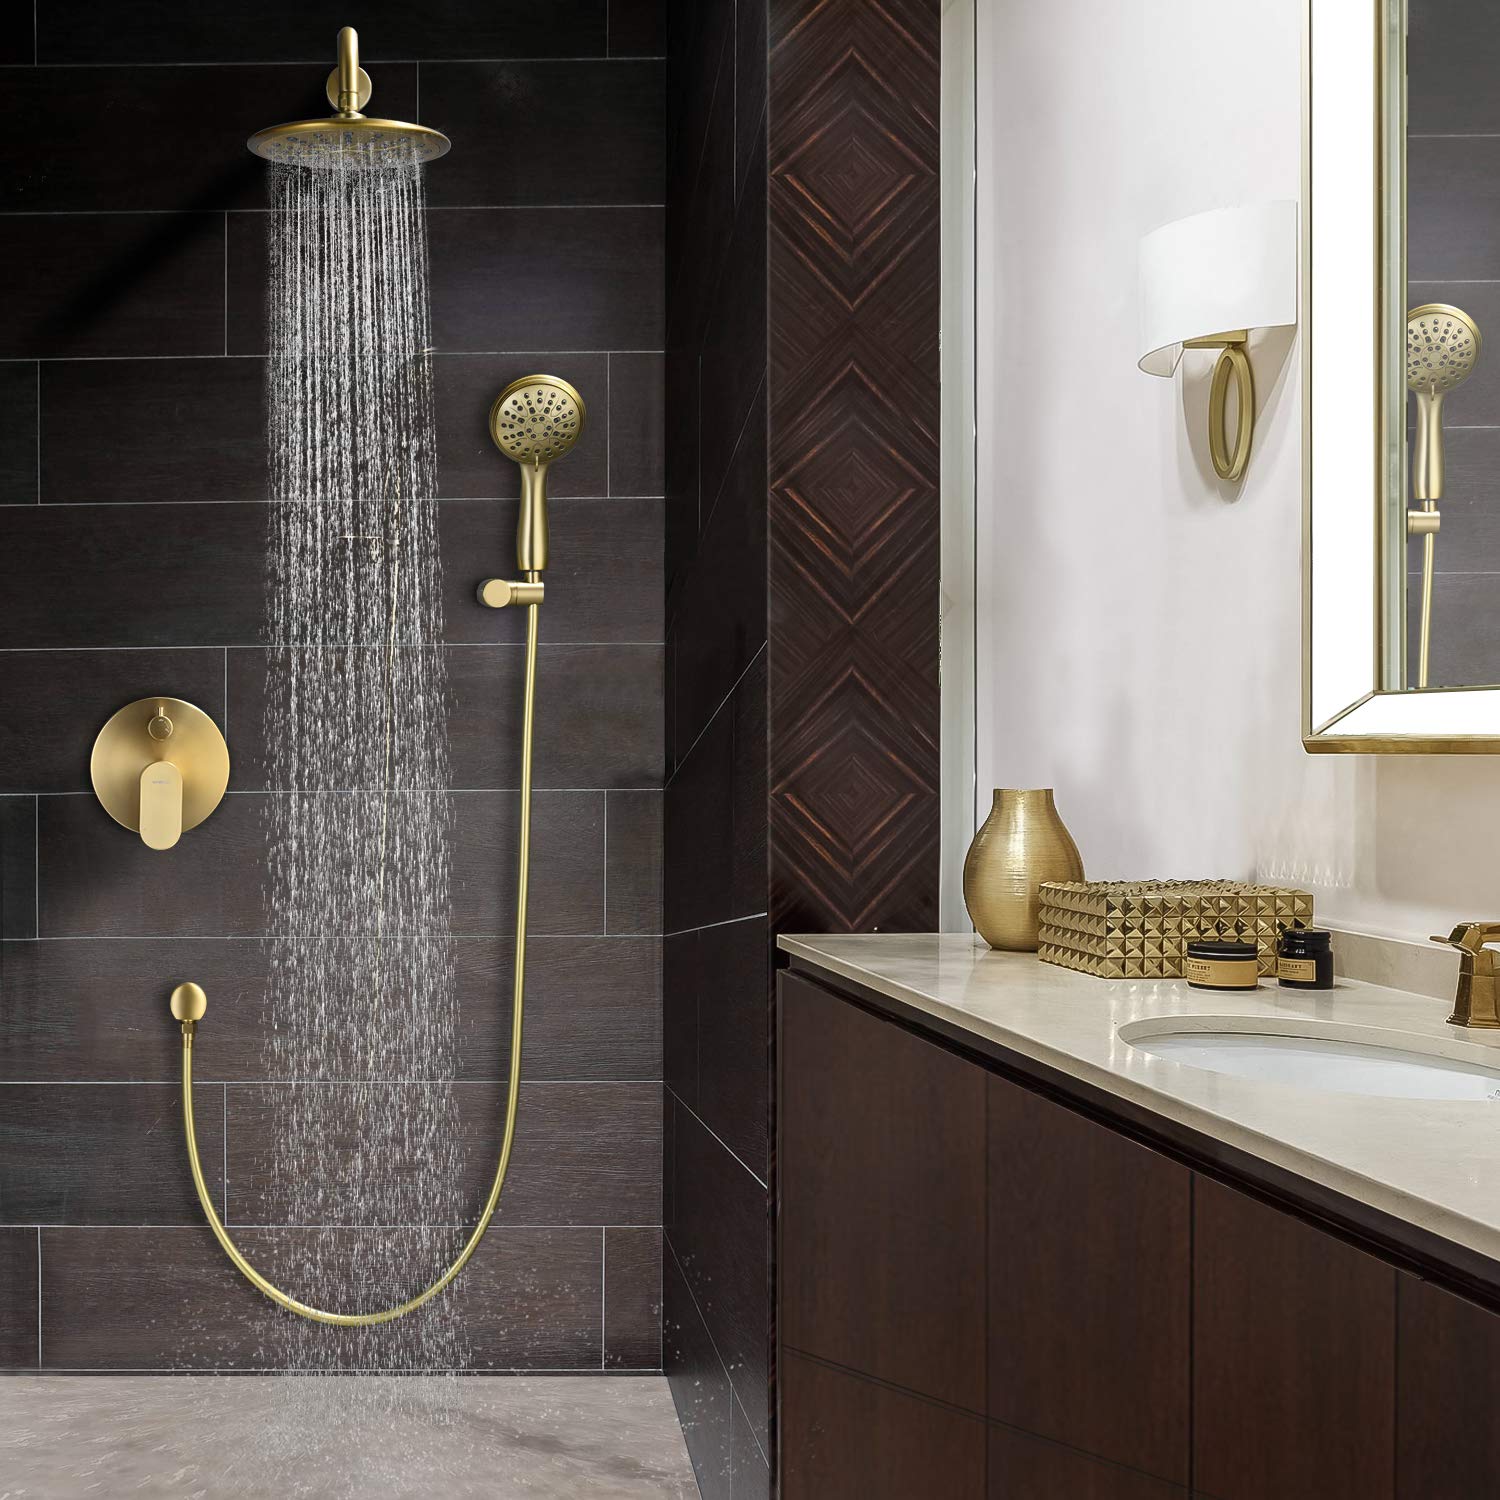 Brushed gold finish——combines minimalist and ultimate taste with a blend of tradition and modernity.